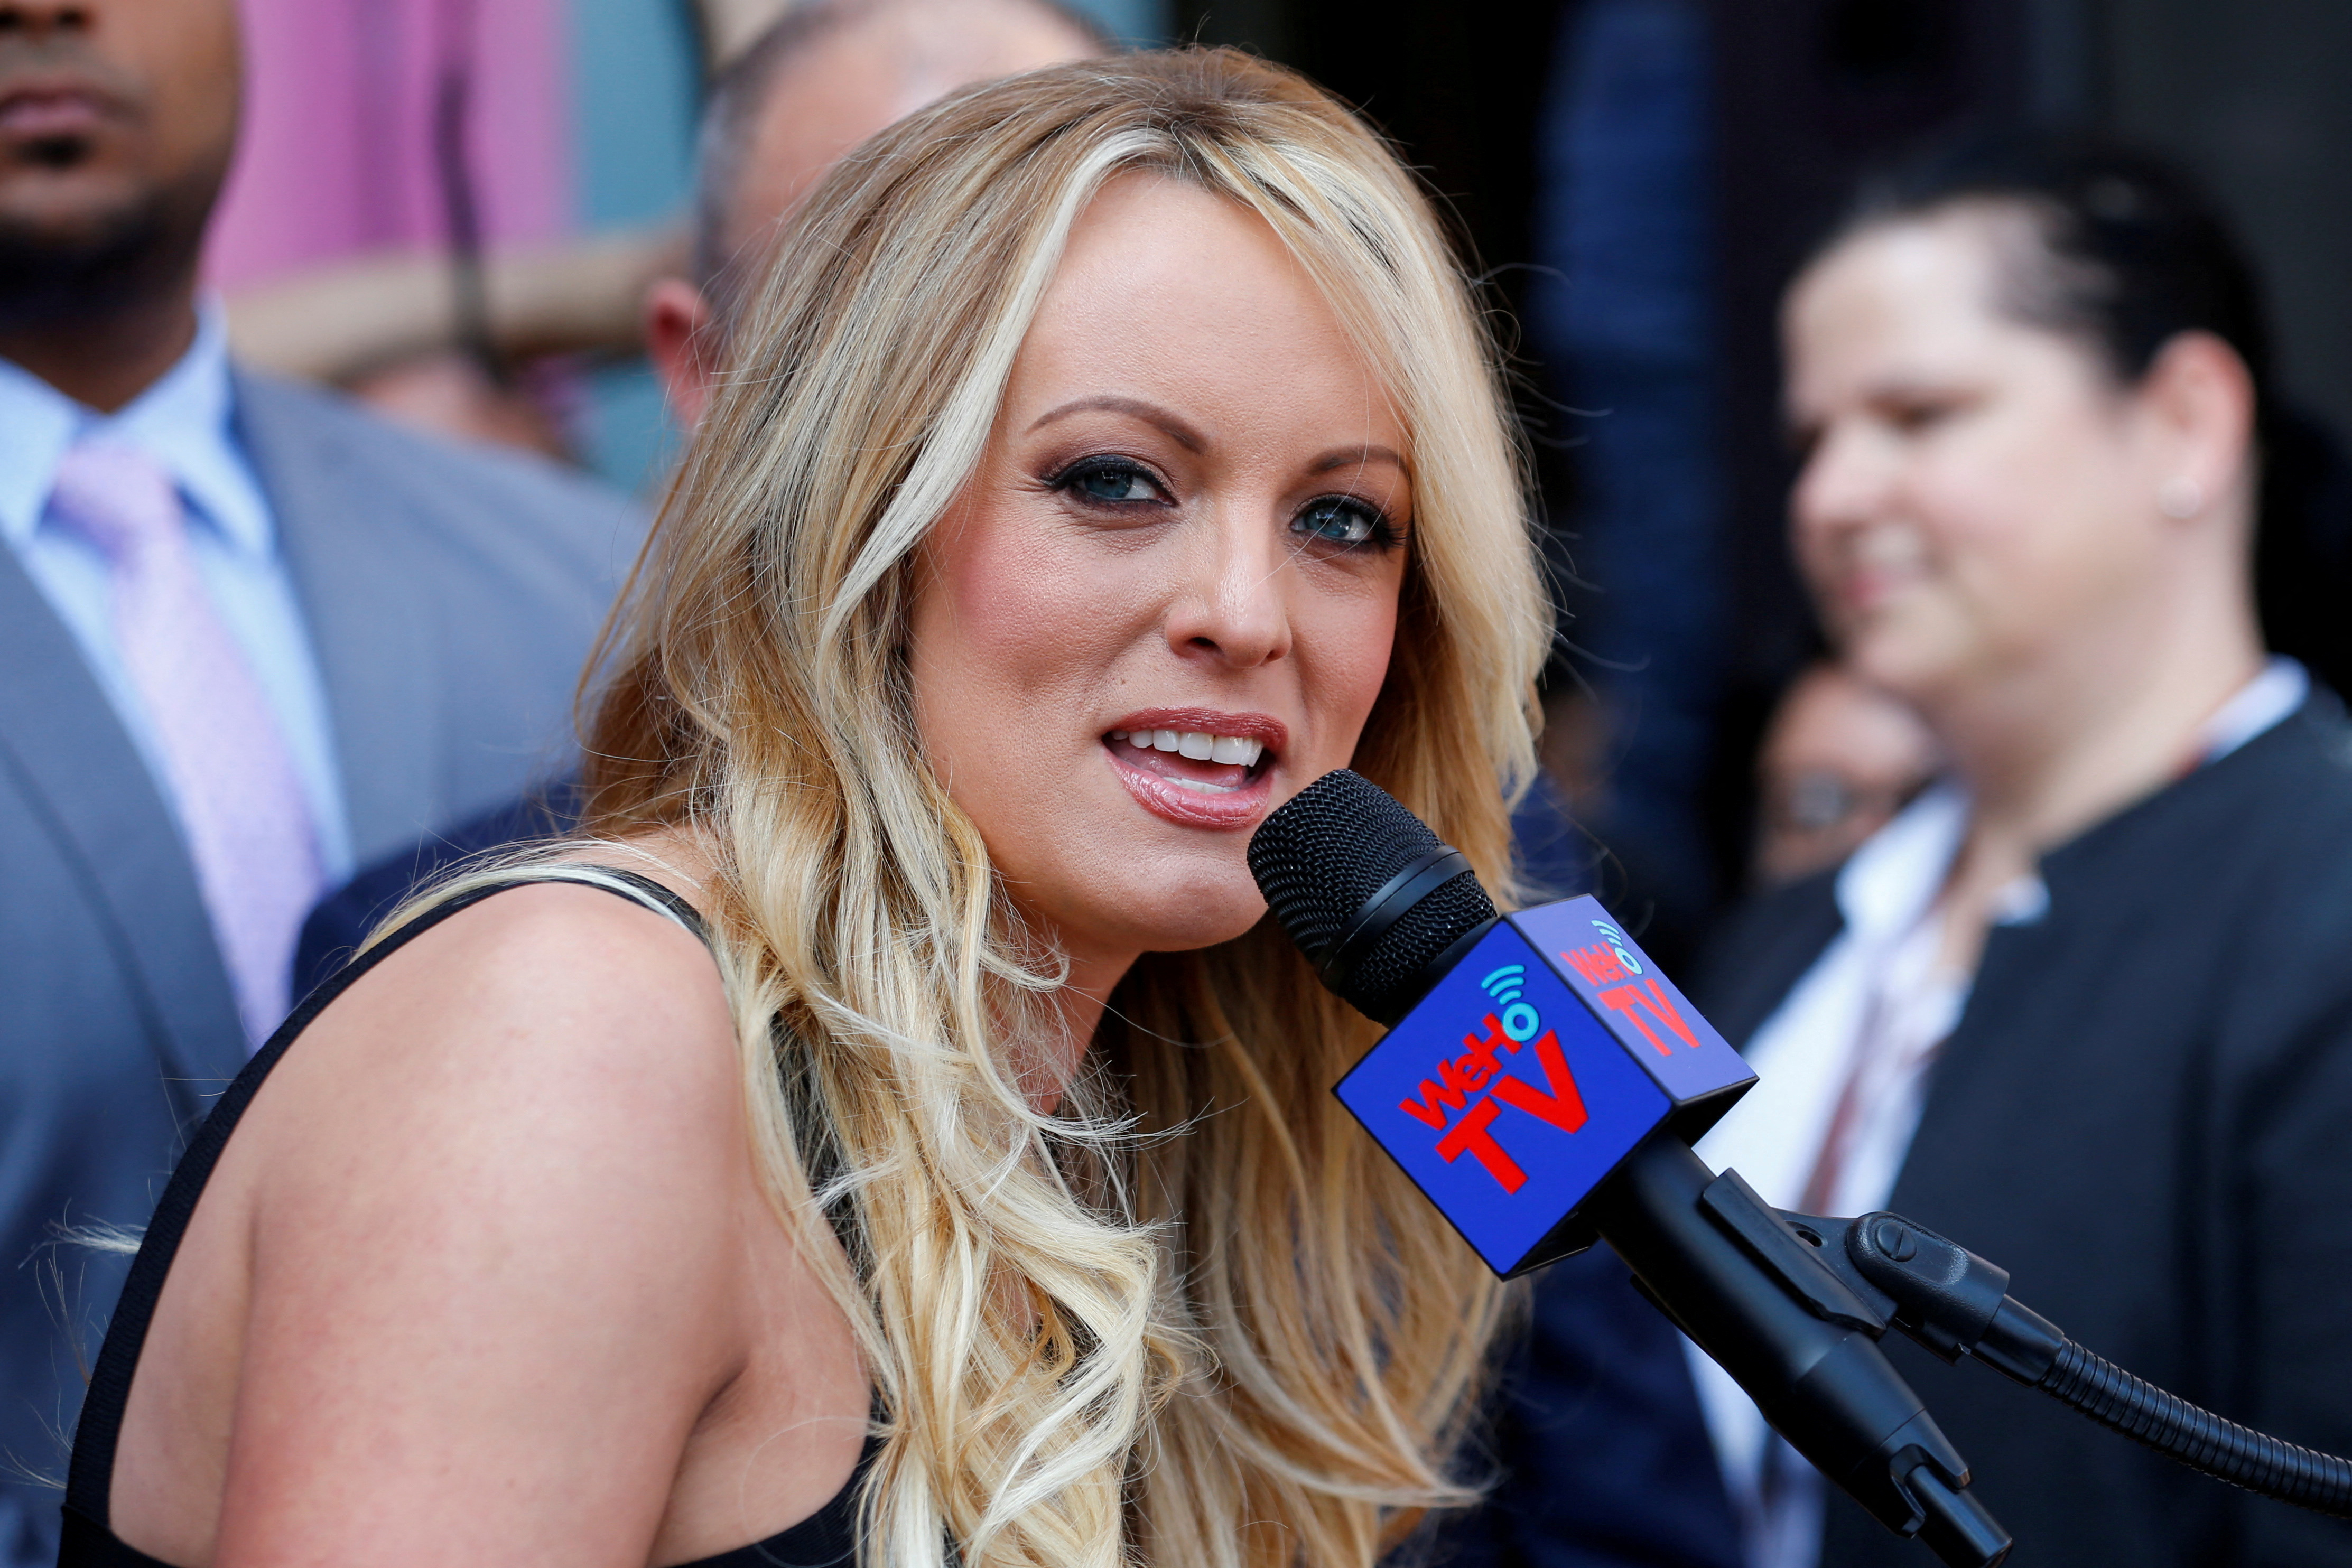 Who is Stormy Daniels and how is she involved in the Donald Trump indictment? Reuters pic pic